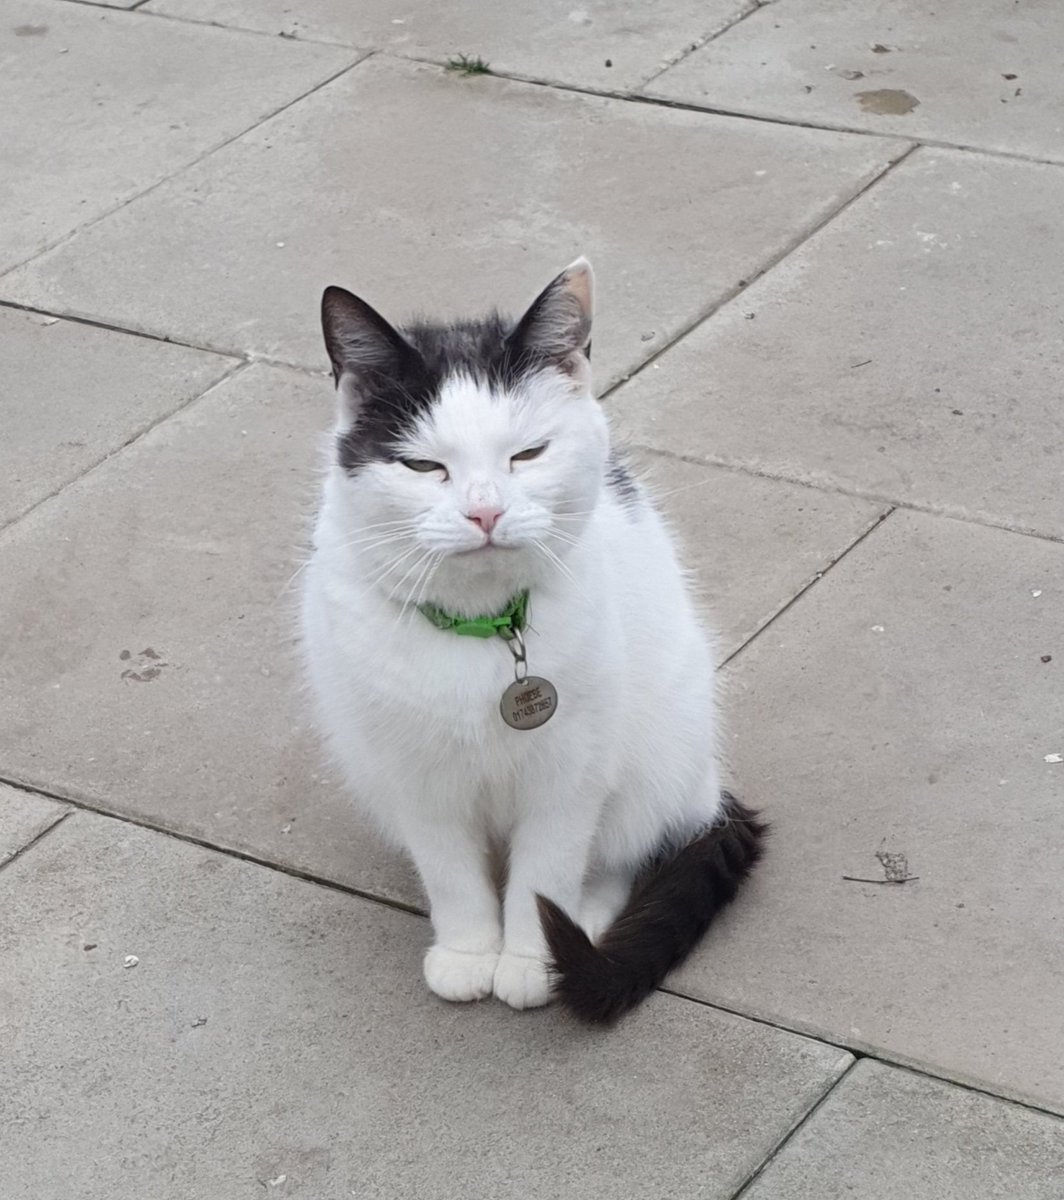 #SundayMorning and Phoebe is sitting posing purrfectly for a photo although she does look a little sleepy. Wonder if she has had a busy night 😸 #inthecompanyofcats #catlovers #catvibes #fabulousfelines #catrescue #cat